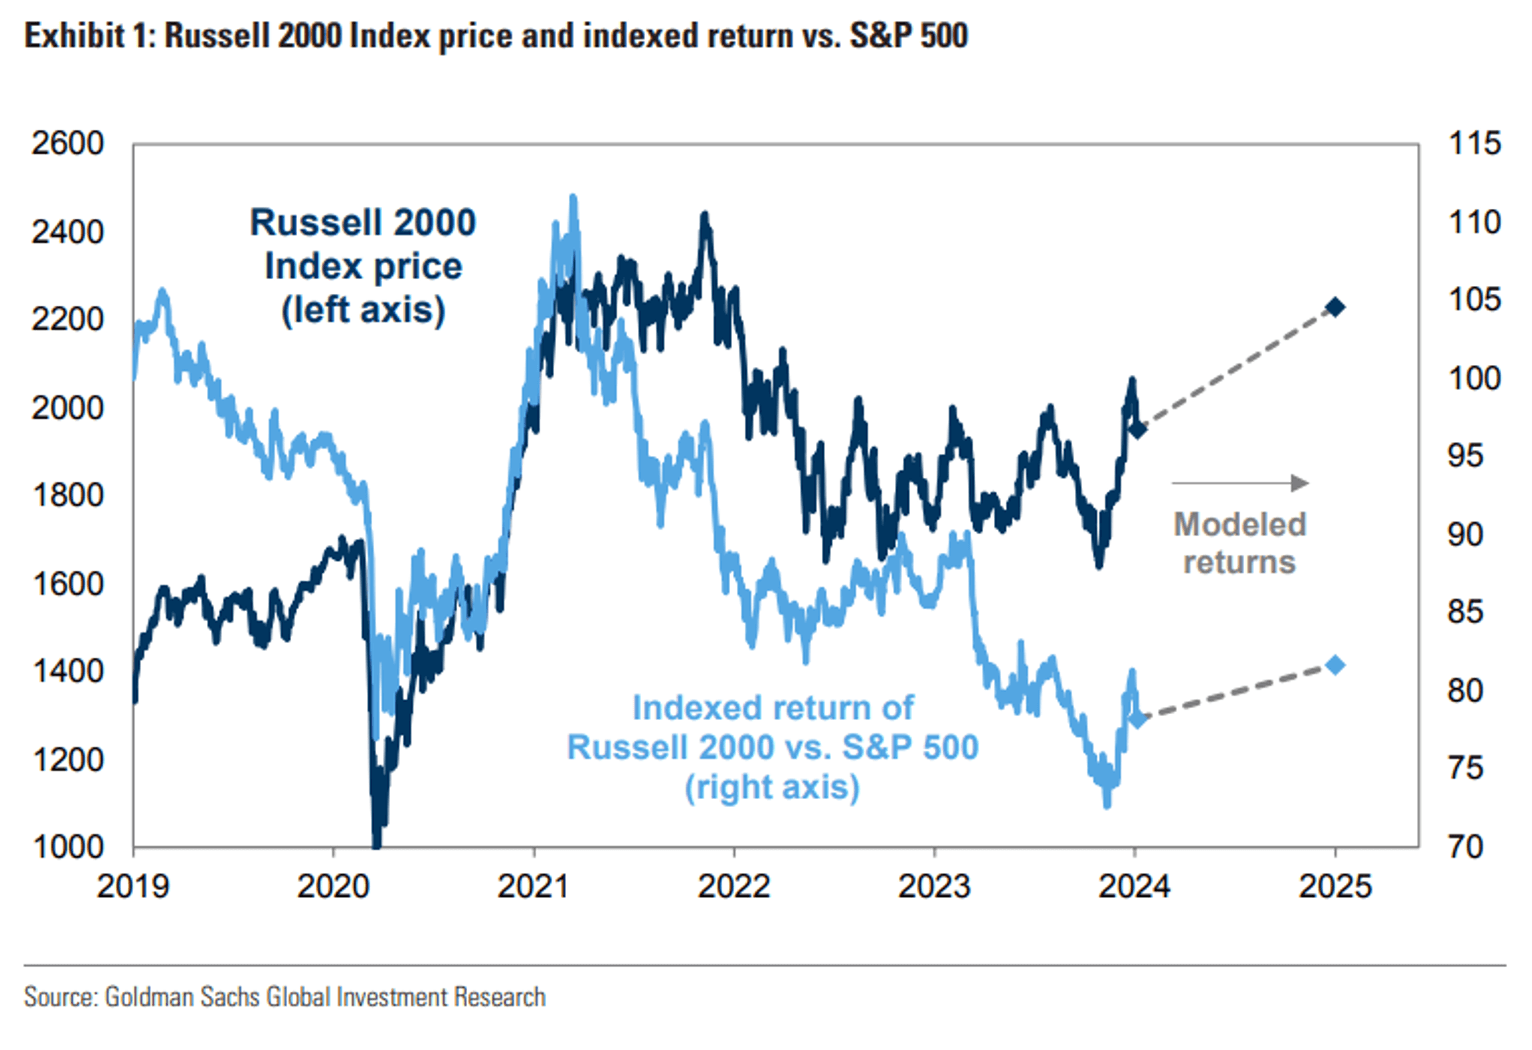 Russell 2000 Index price and indexed return vs. S&P 500